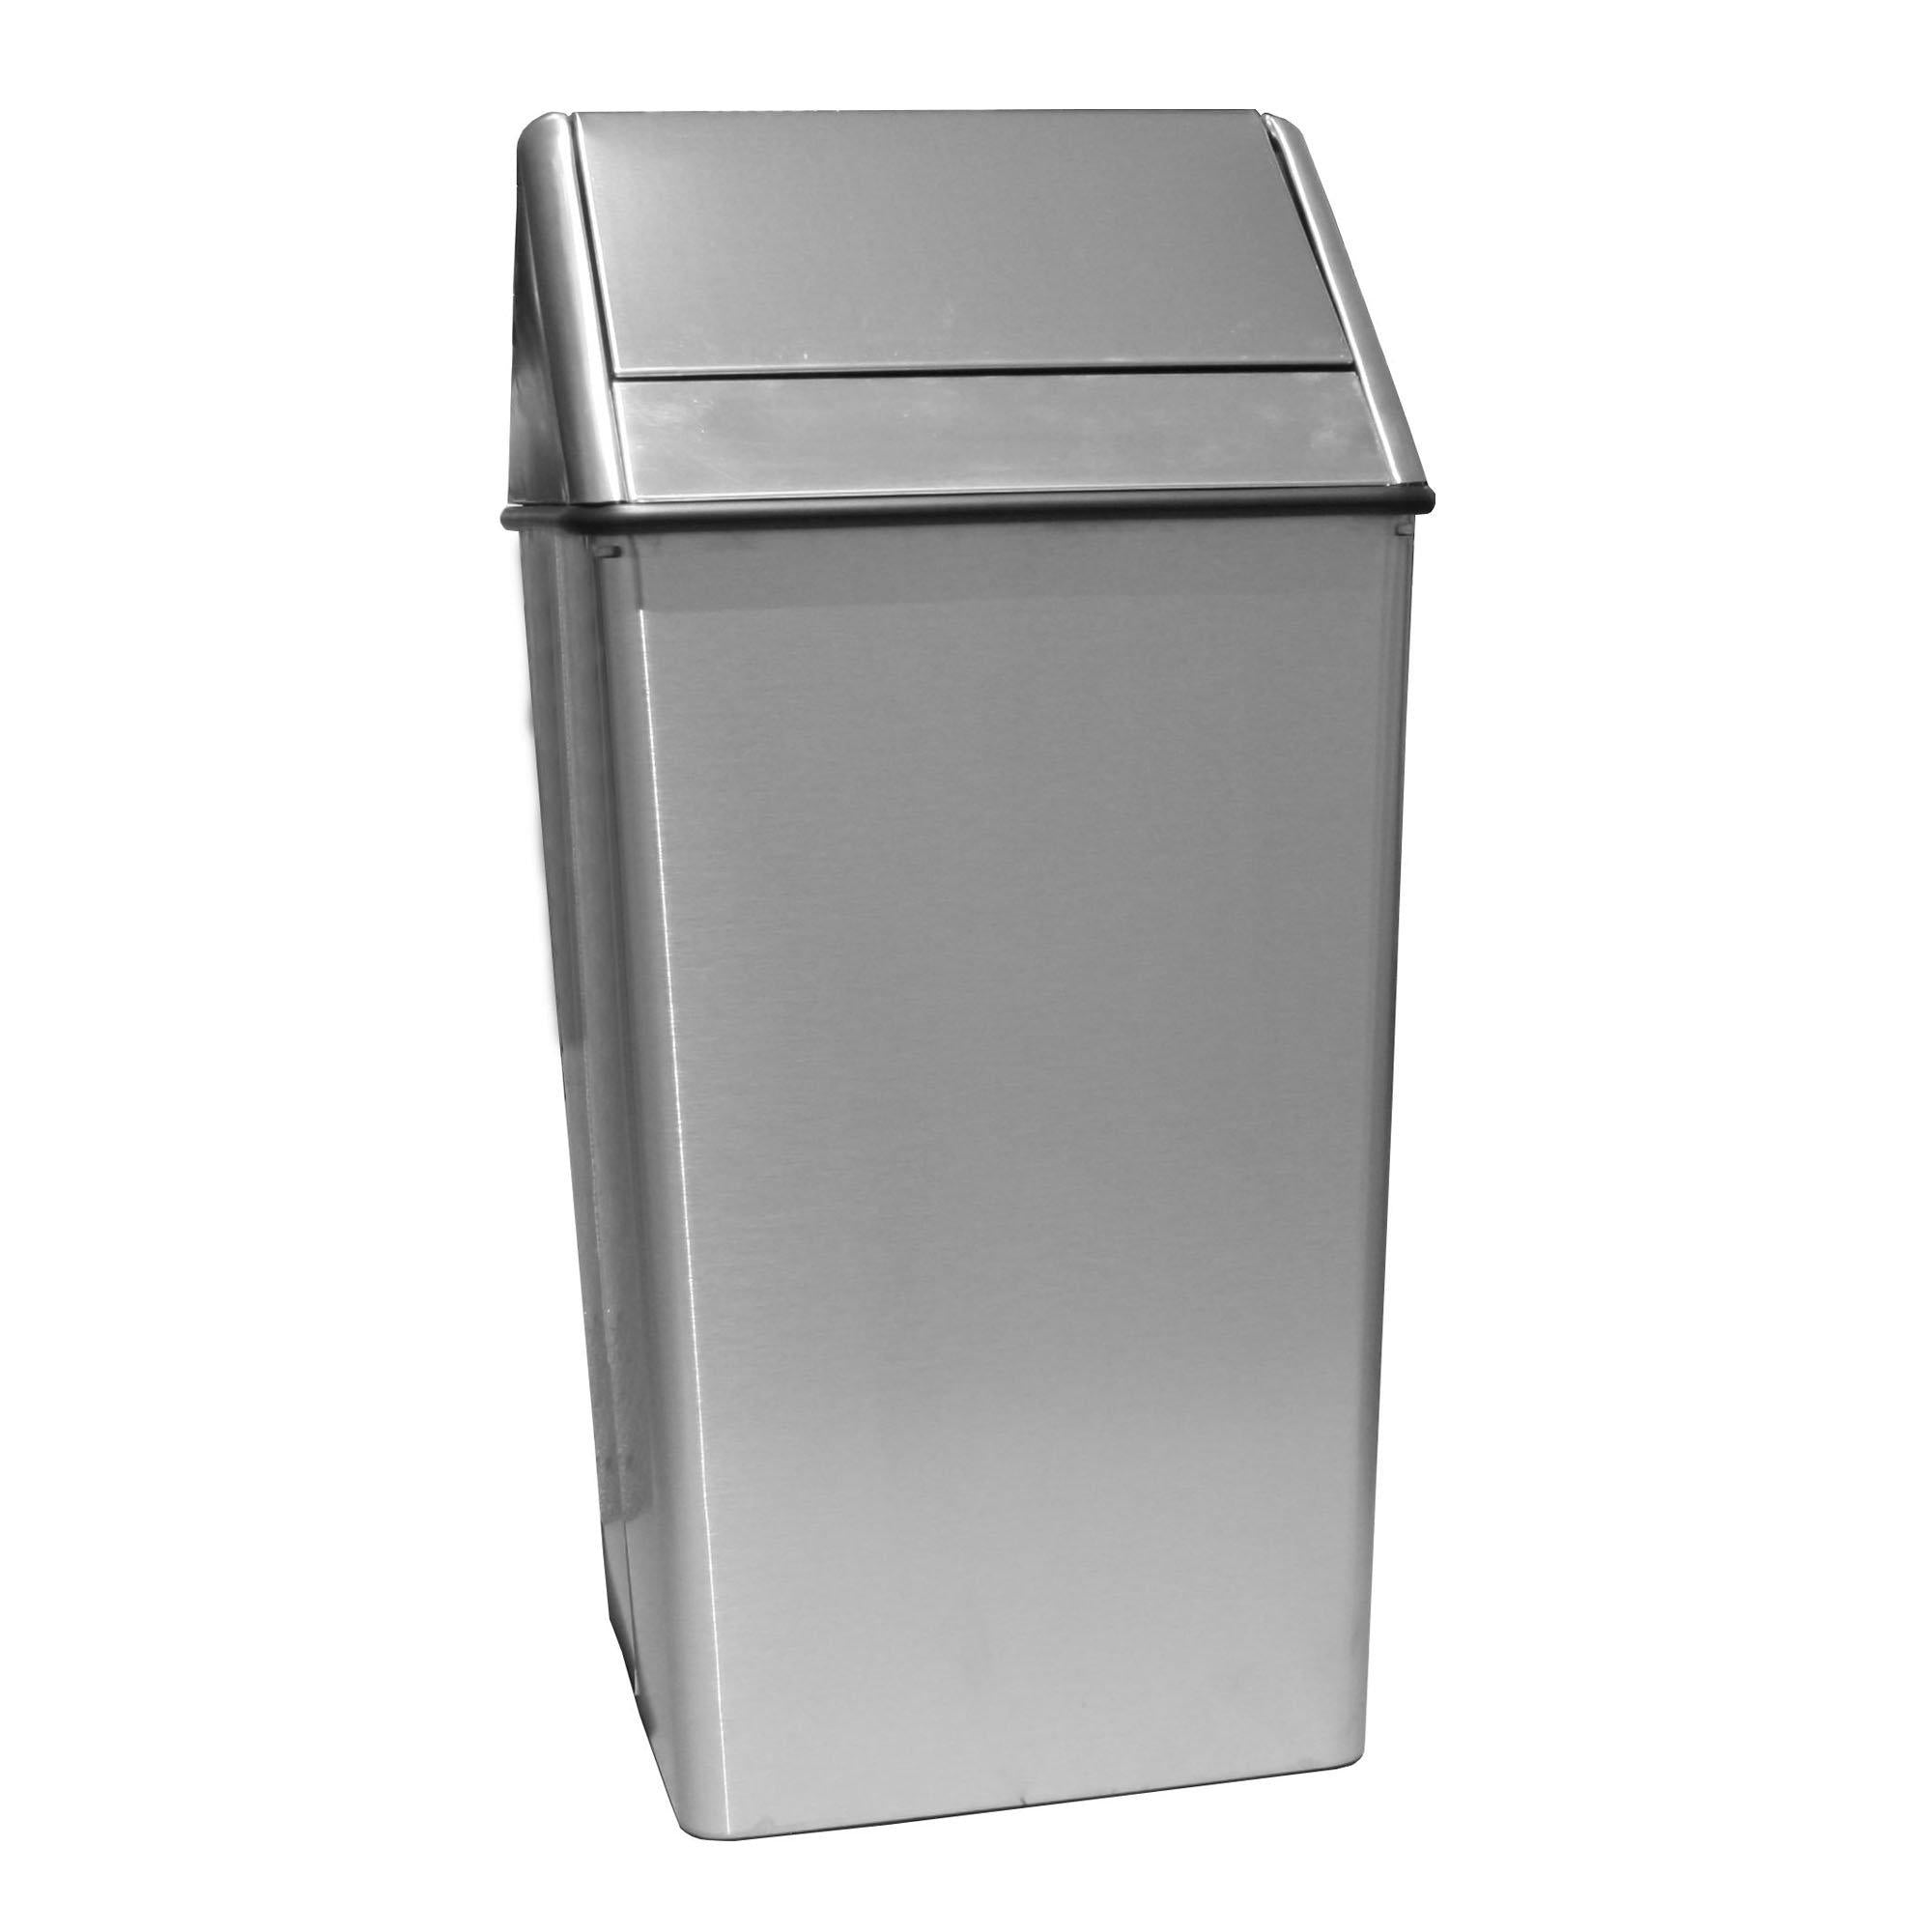 Waste Watcher Stainless Steel Swing Top Waste Receptacle, 36 Gallon Capacity